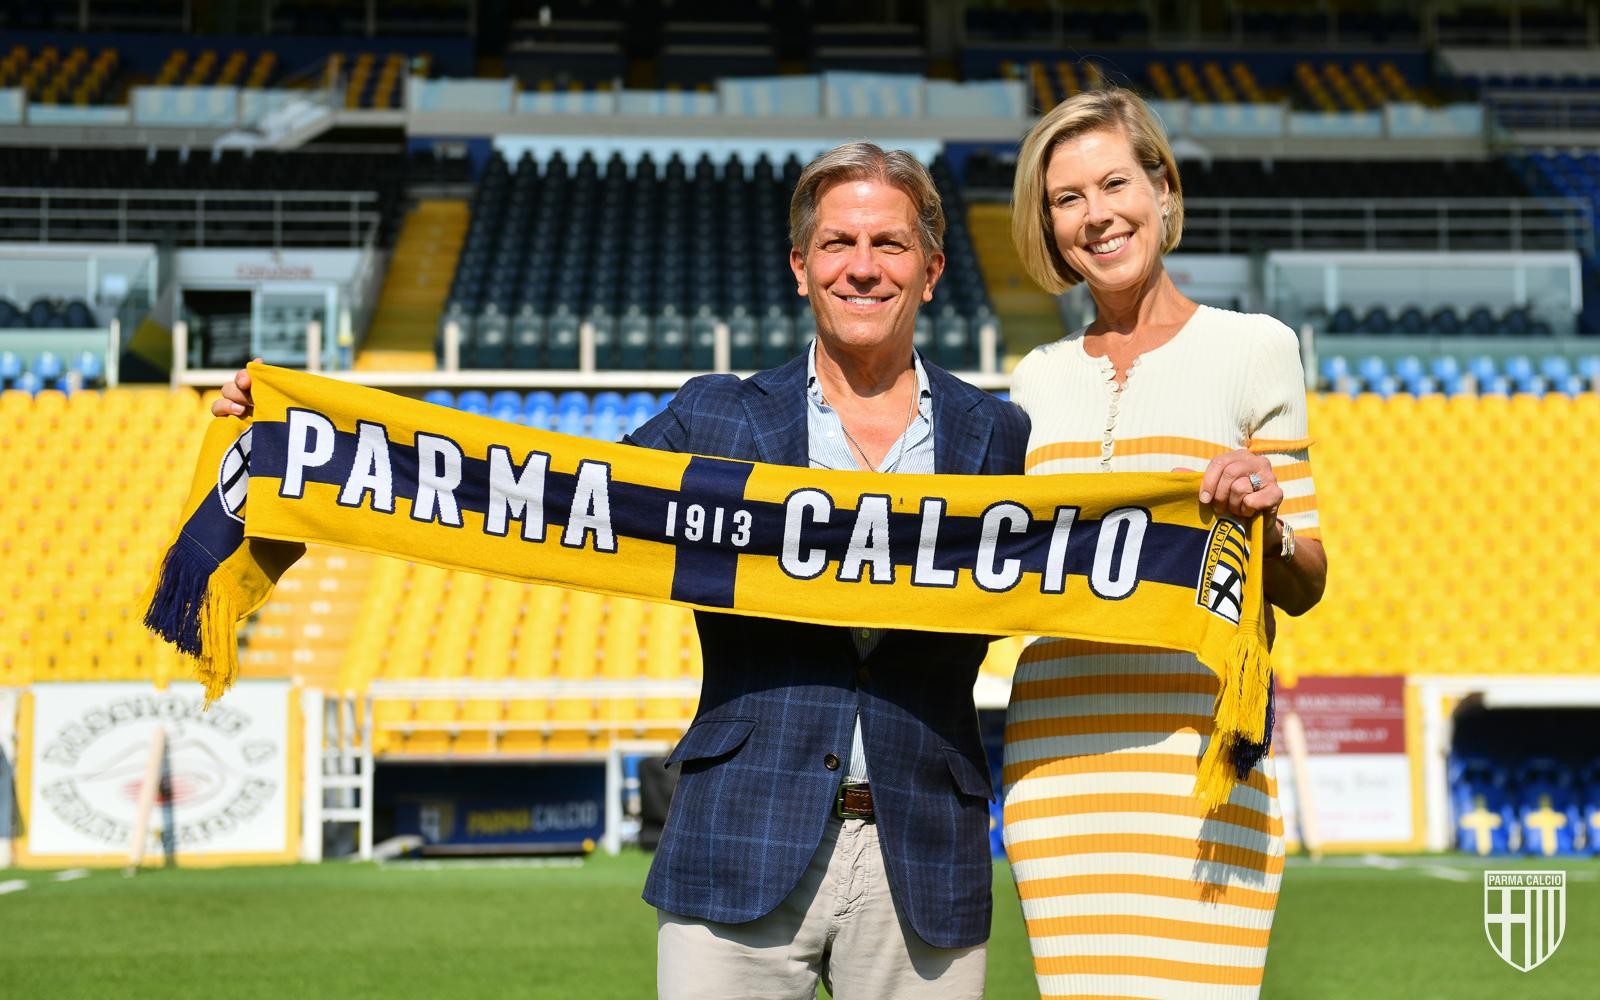 KRAUSE GROUP - AN AMERICAN COMPANY LED BY CHAIRMAN AND CEO, KYLE J. KRAUSE - PURCHASE CONTROLLING STAKE IN SERIE A FOOTBALL TEAM PARMA CALCIO 1913